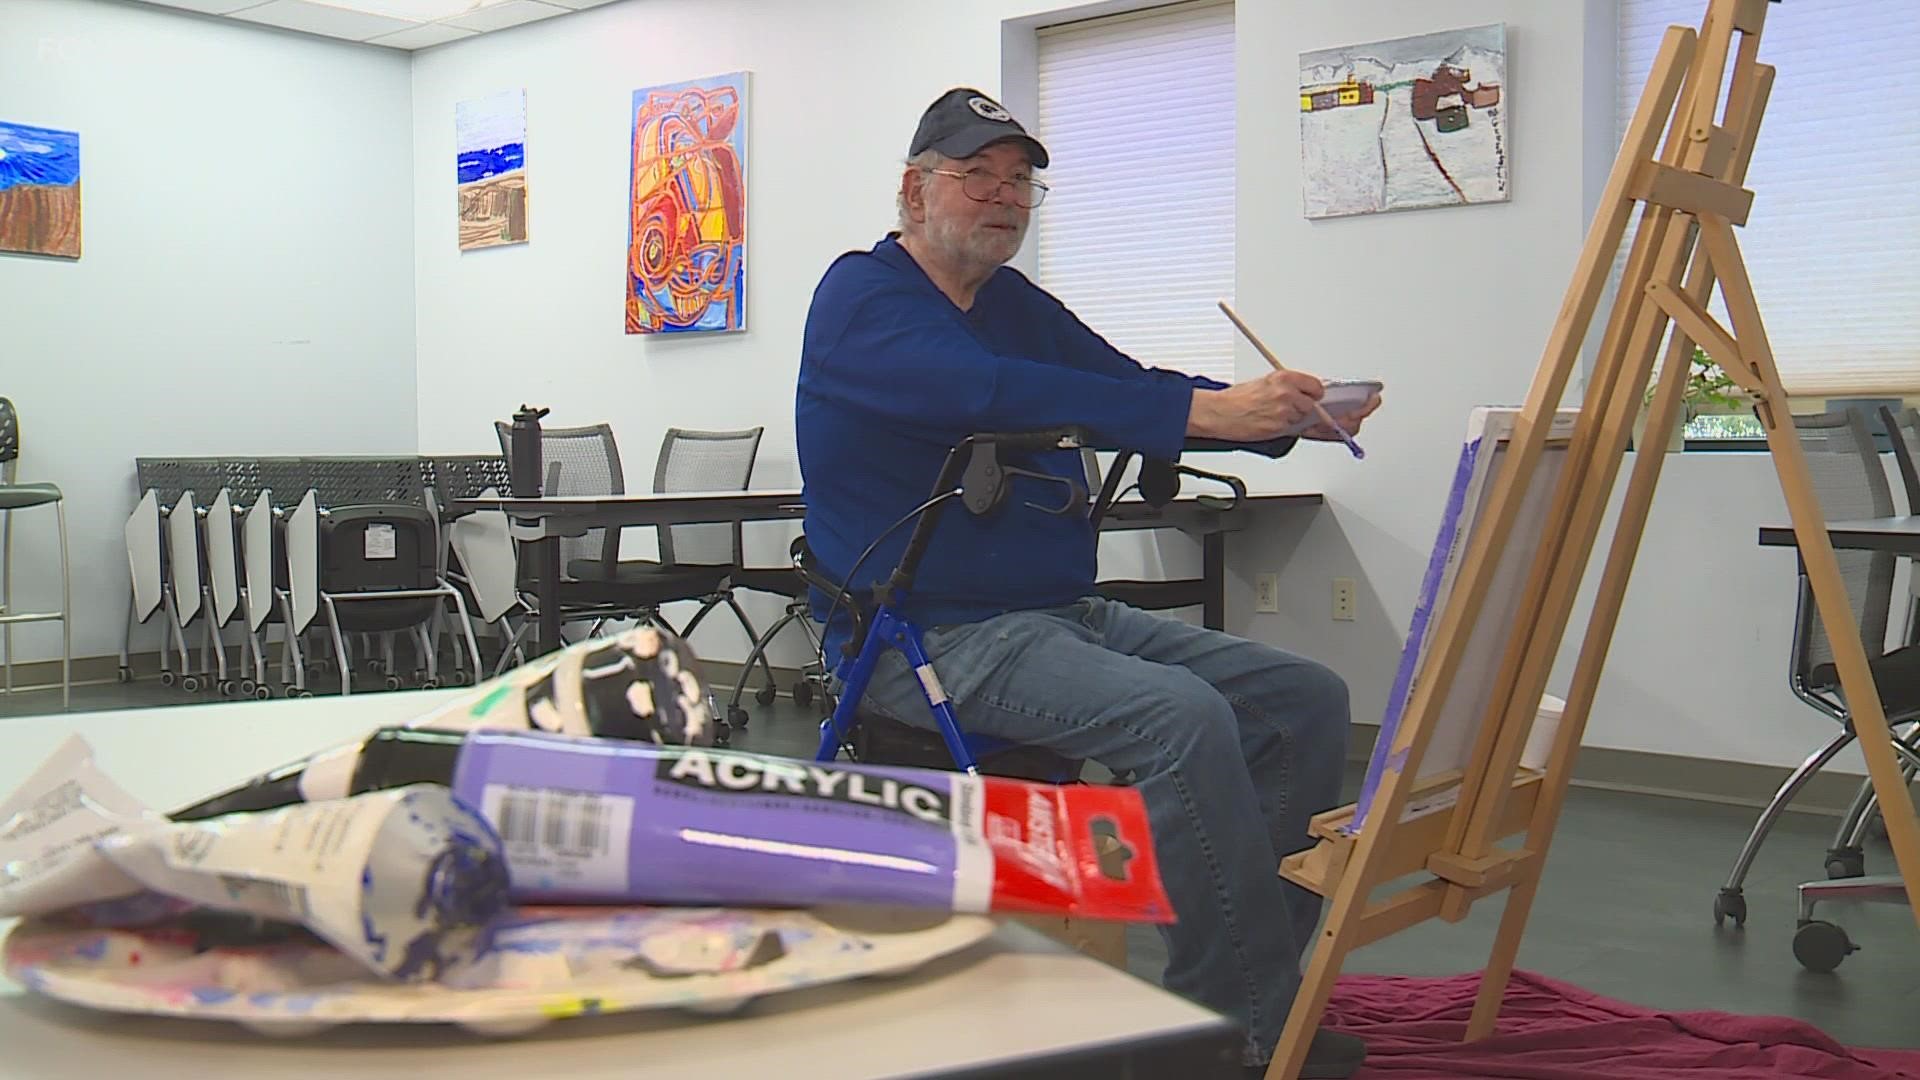 He refers to himself as “The Parkinson’s Painter” and, despite his disability, 79-year-old Norman Greenstein is still following his passion of painting.